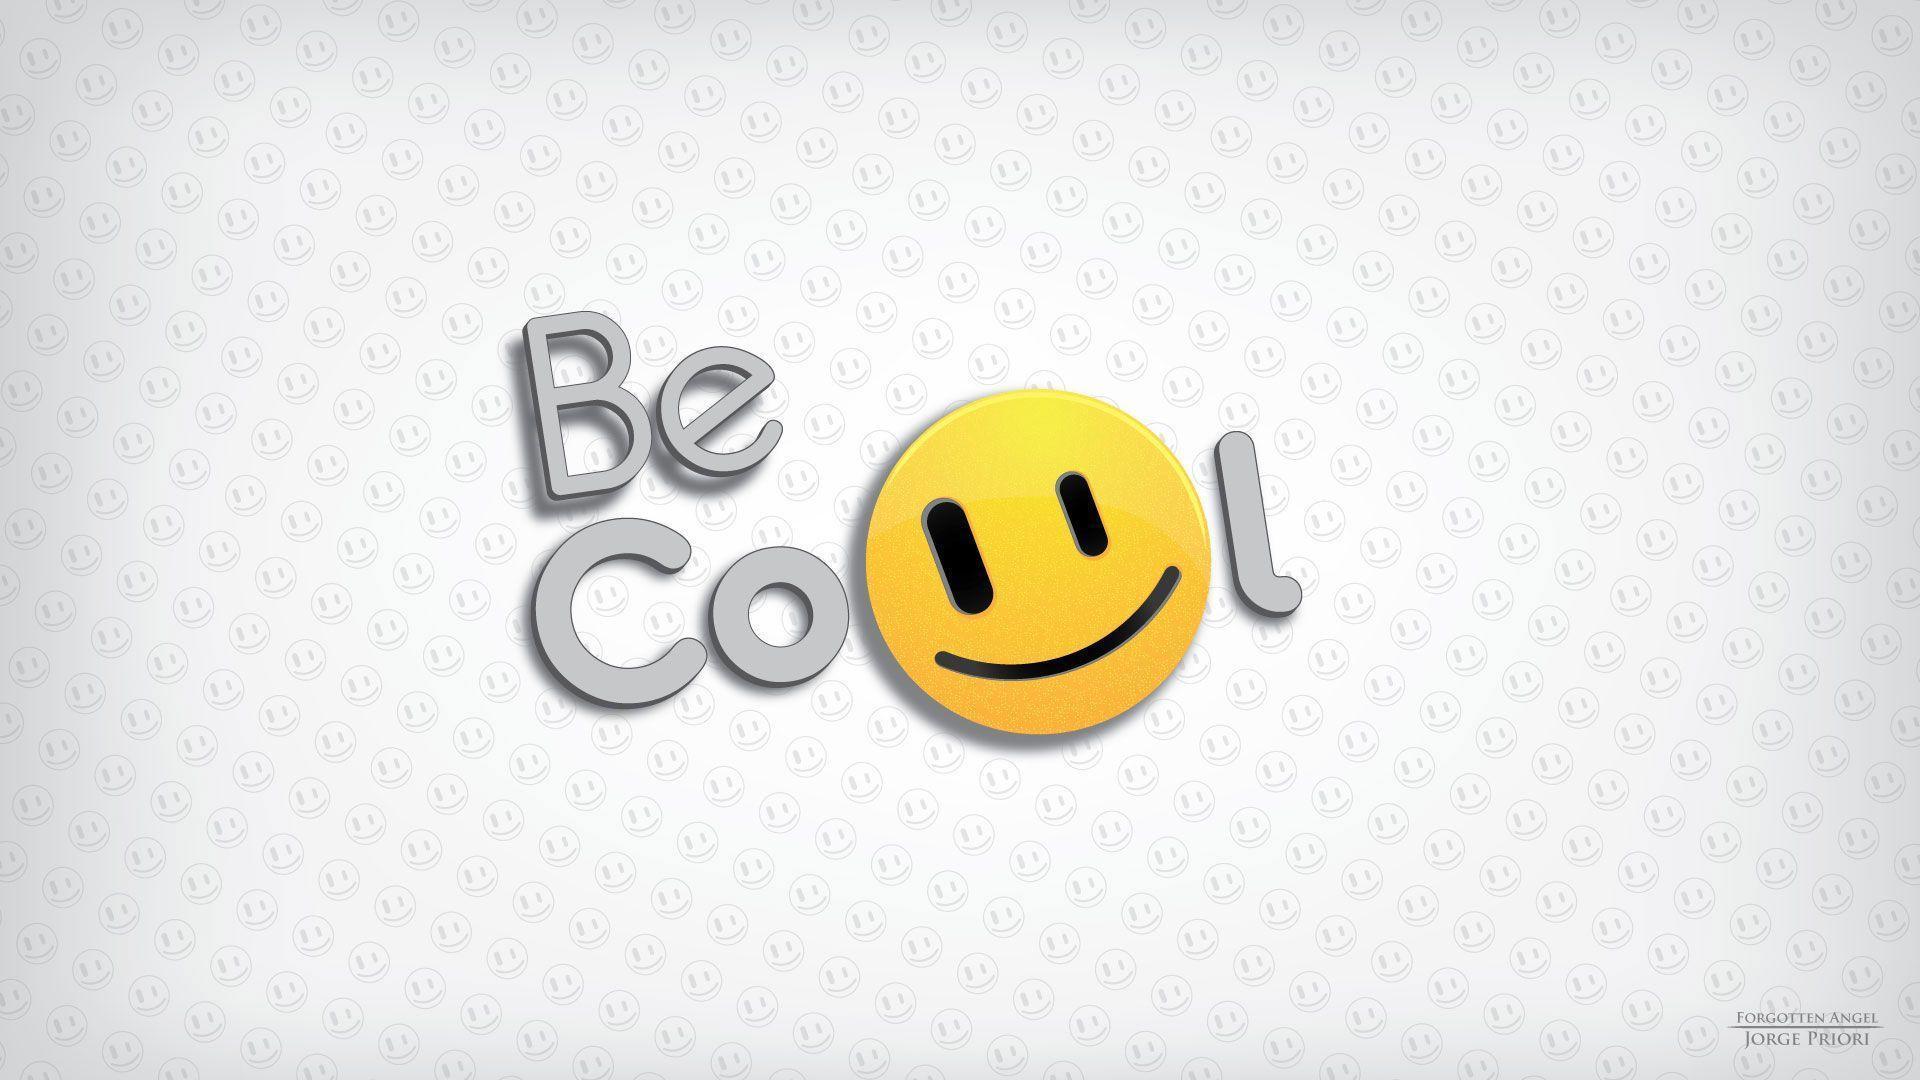 Be Cool Smile for Desktop Background HD Wallpaper 1920x1080PX